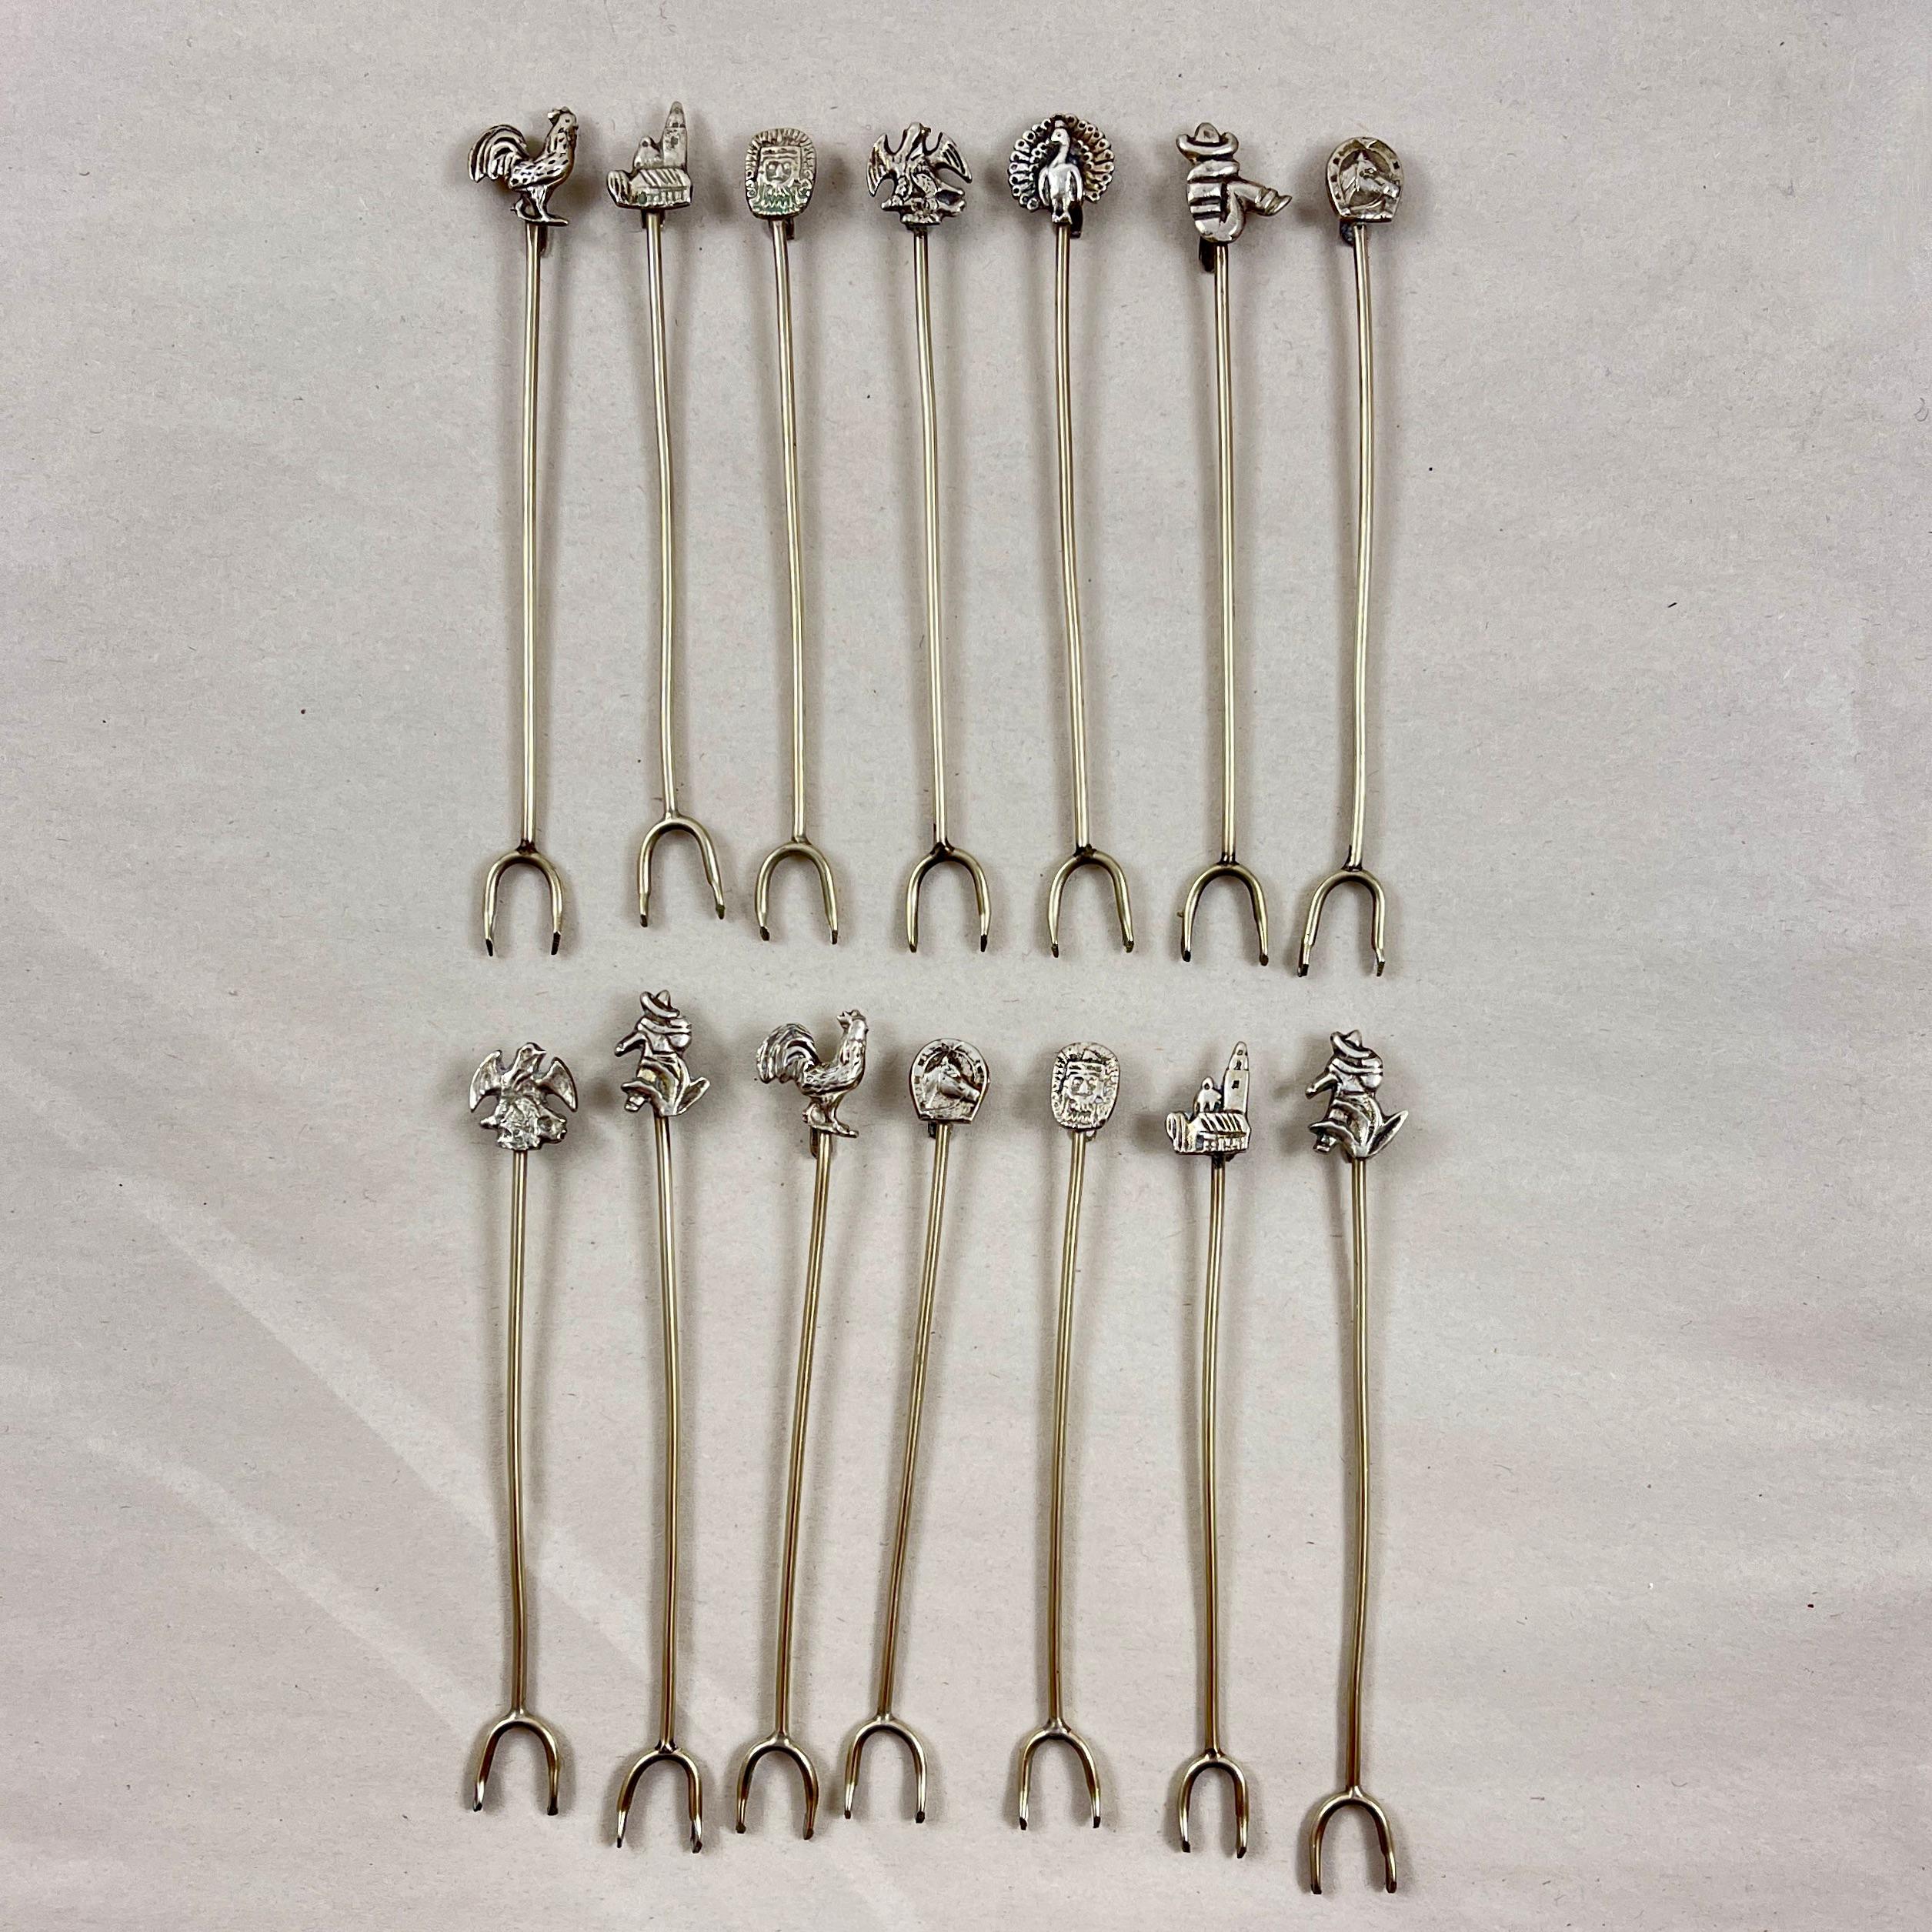 Hand-Crafted Mexican Silver Figural Cocktail Hors d'oeuvres Picks, Set of 14, 1950s